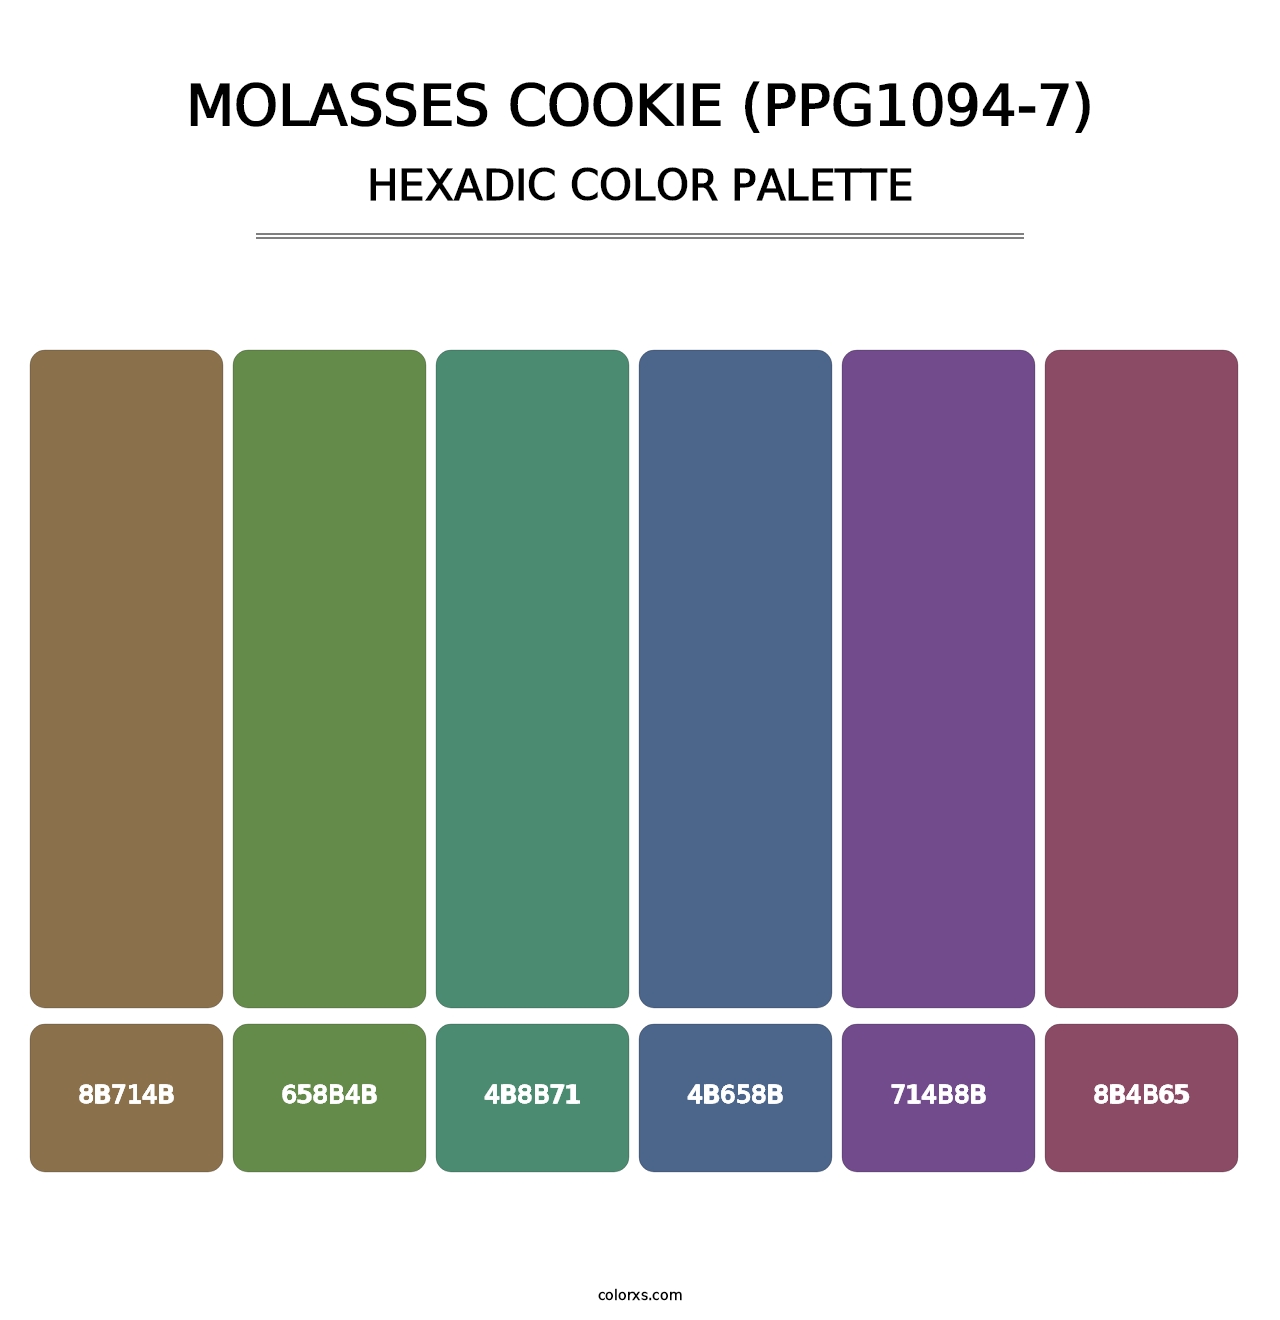 Molasses Cookie (PPG1094-7) - Hexadic Color Palette